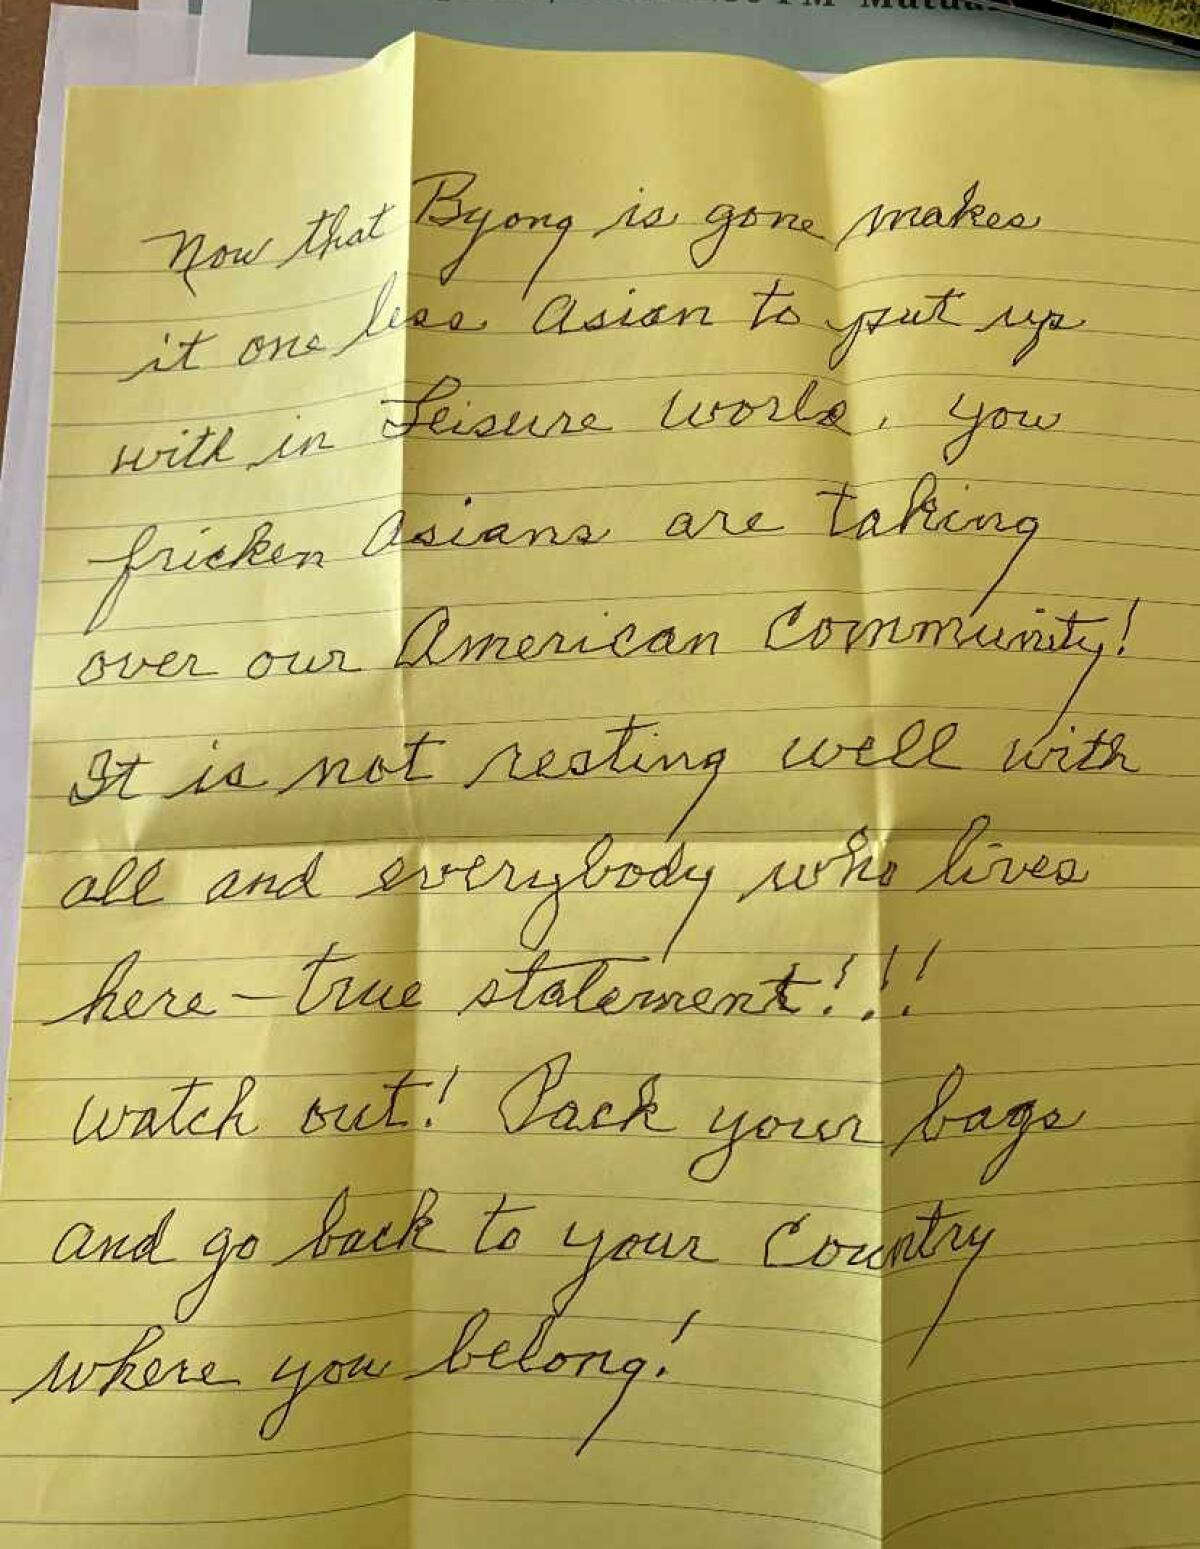 A handwritten letter with racist statements  